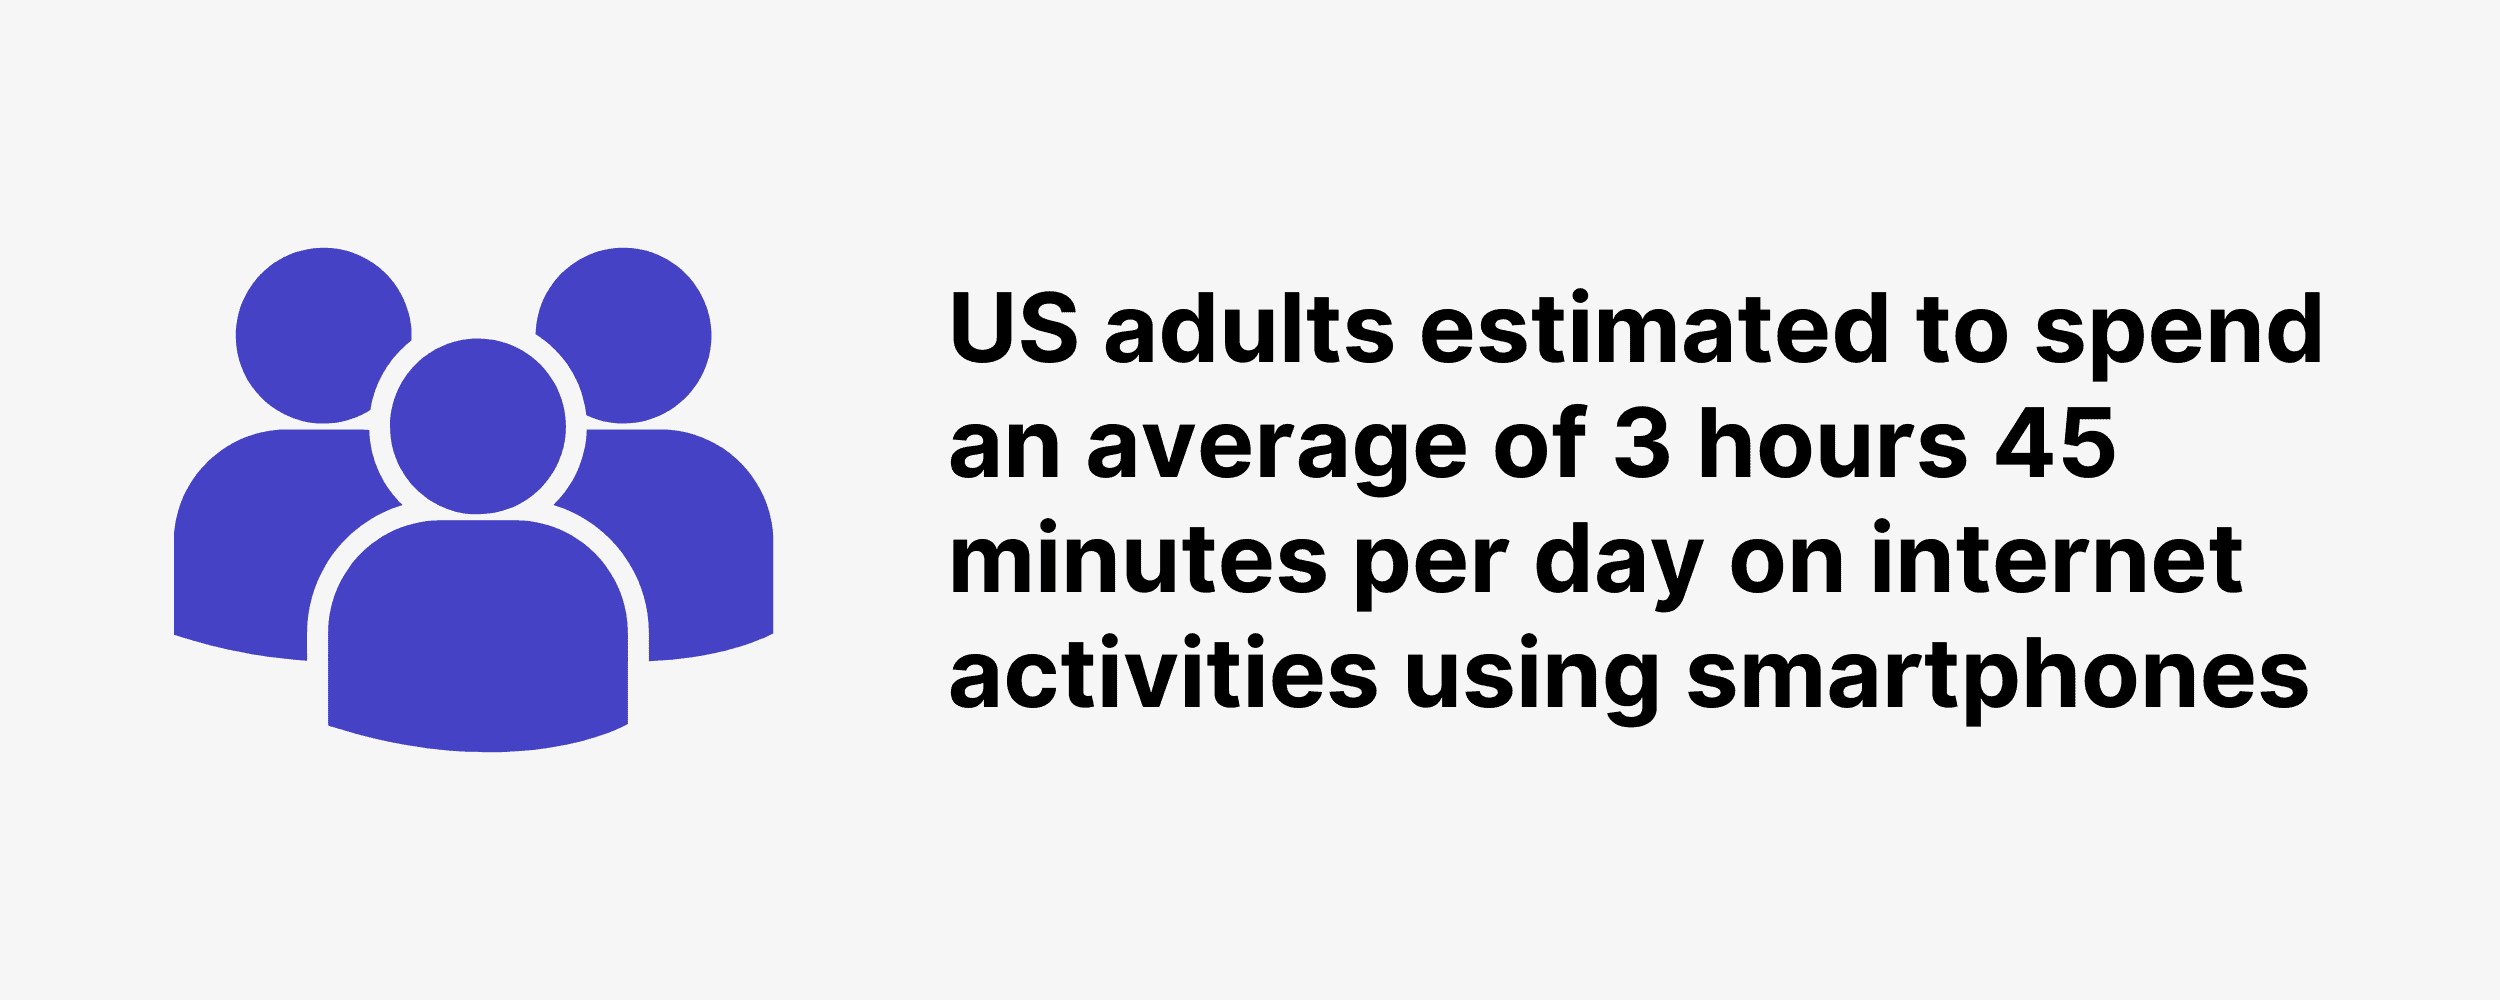 US adults estimated to spend an average of 3 hours 45 minutes per day on internet activities using smartphones